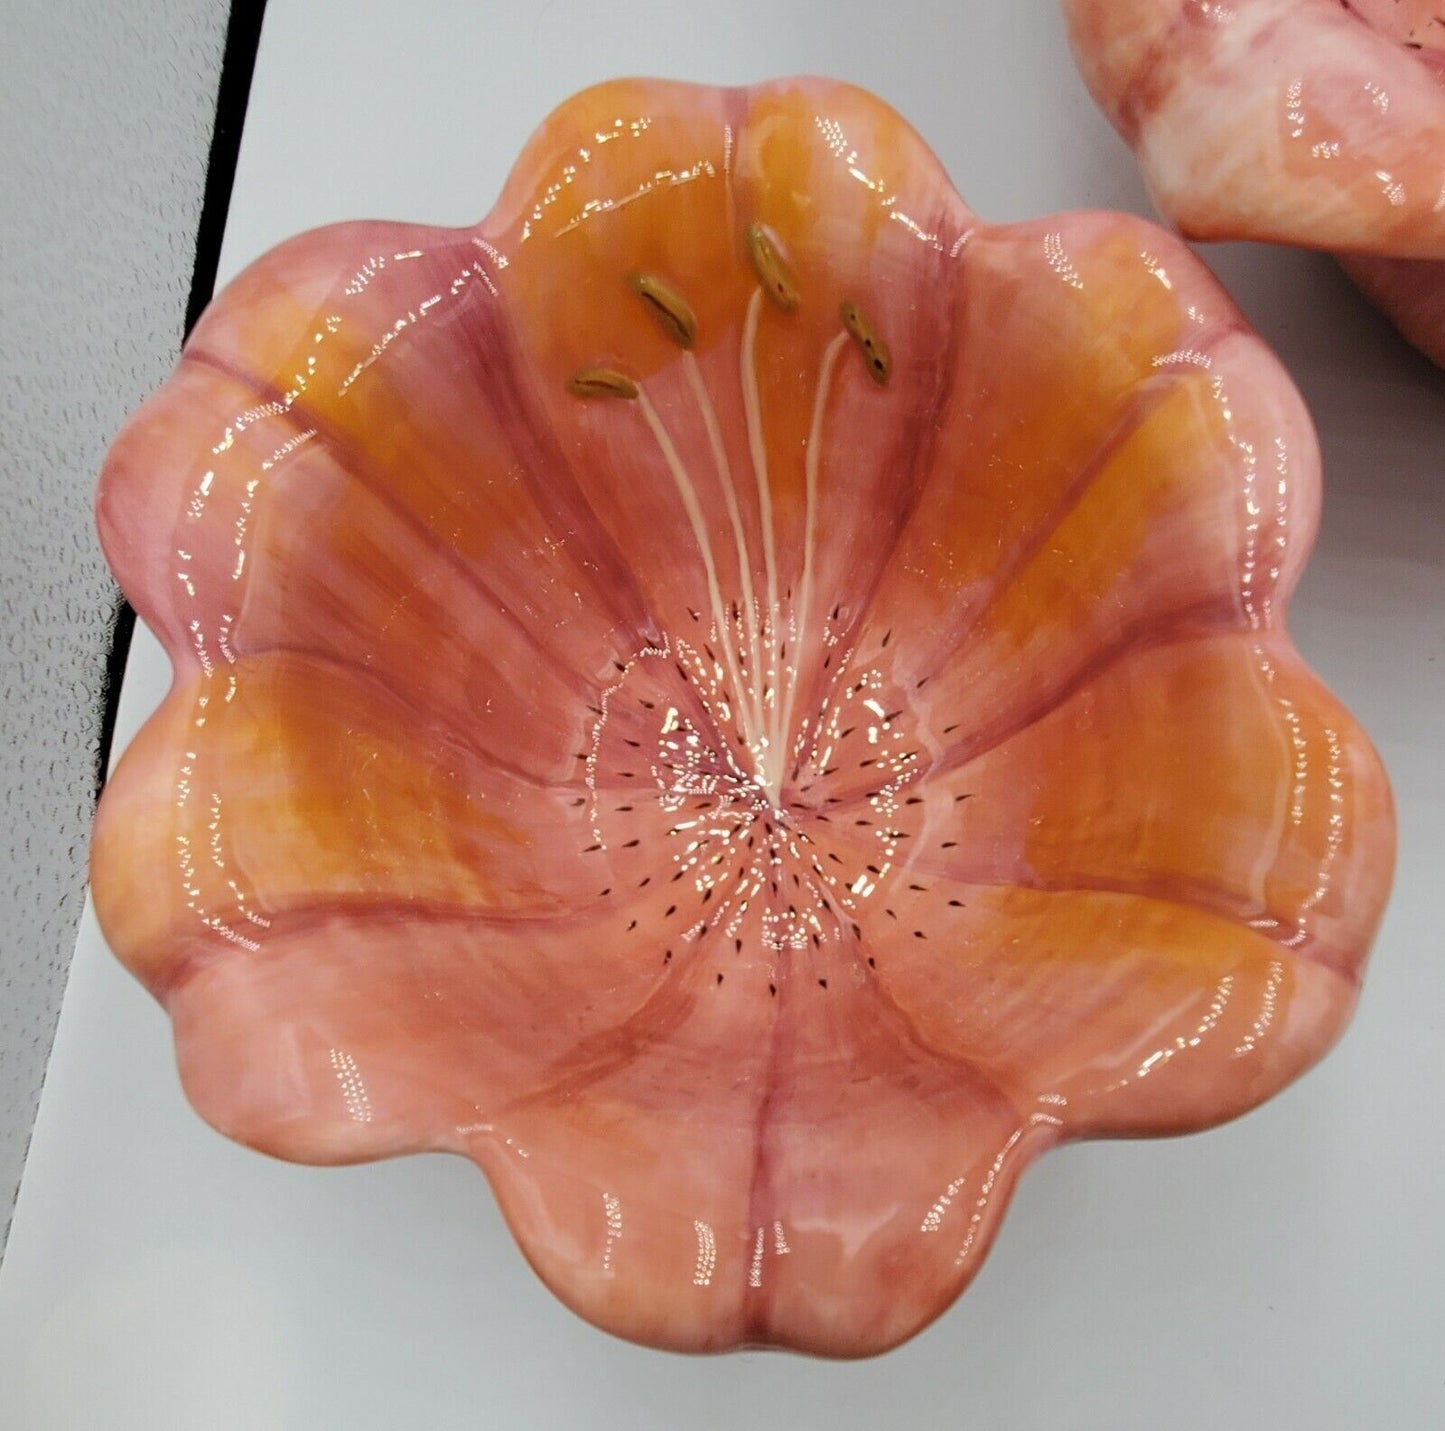 Pair of Perfectly Pink Flower Serving Bowls